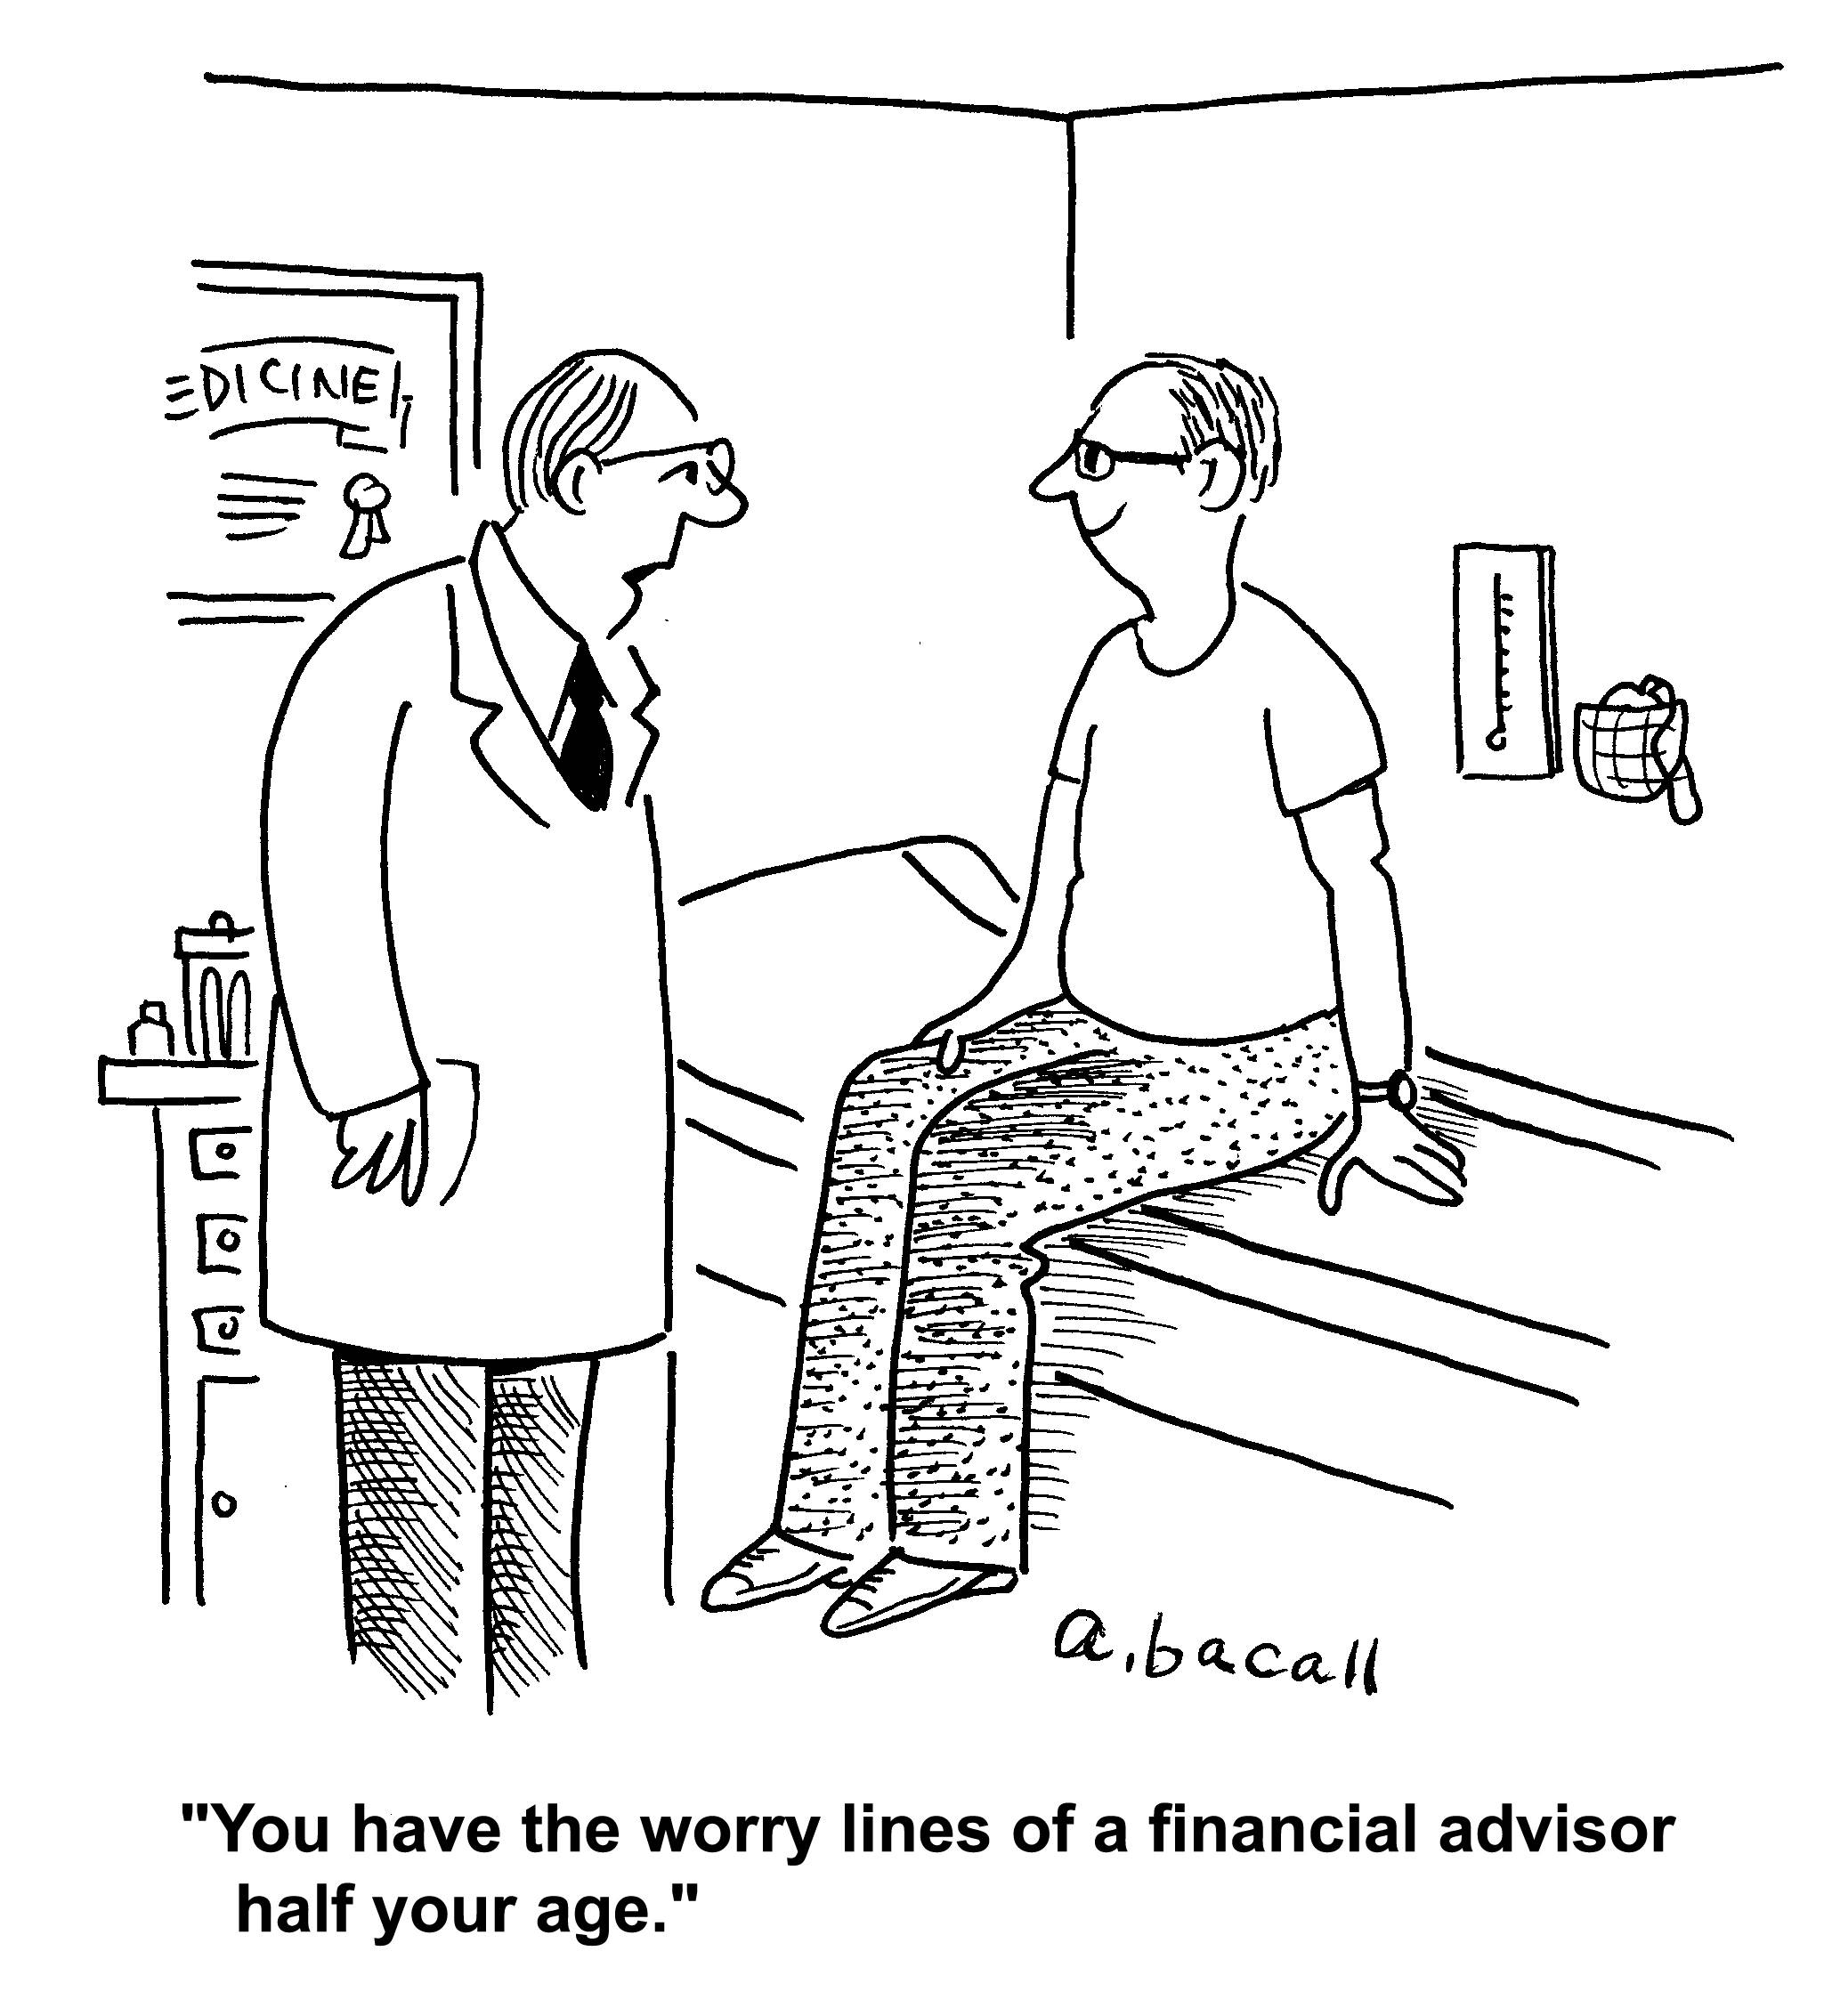 Financial advisors, worry lines, funny, doctor, age, check up, financial